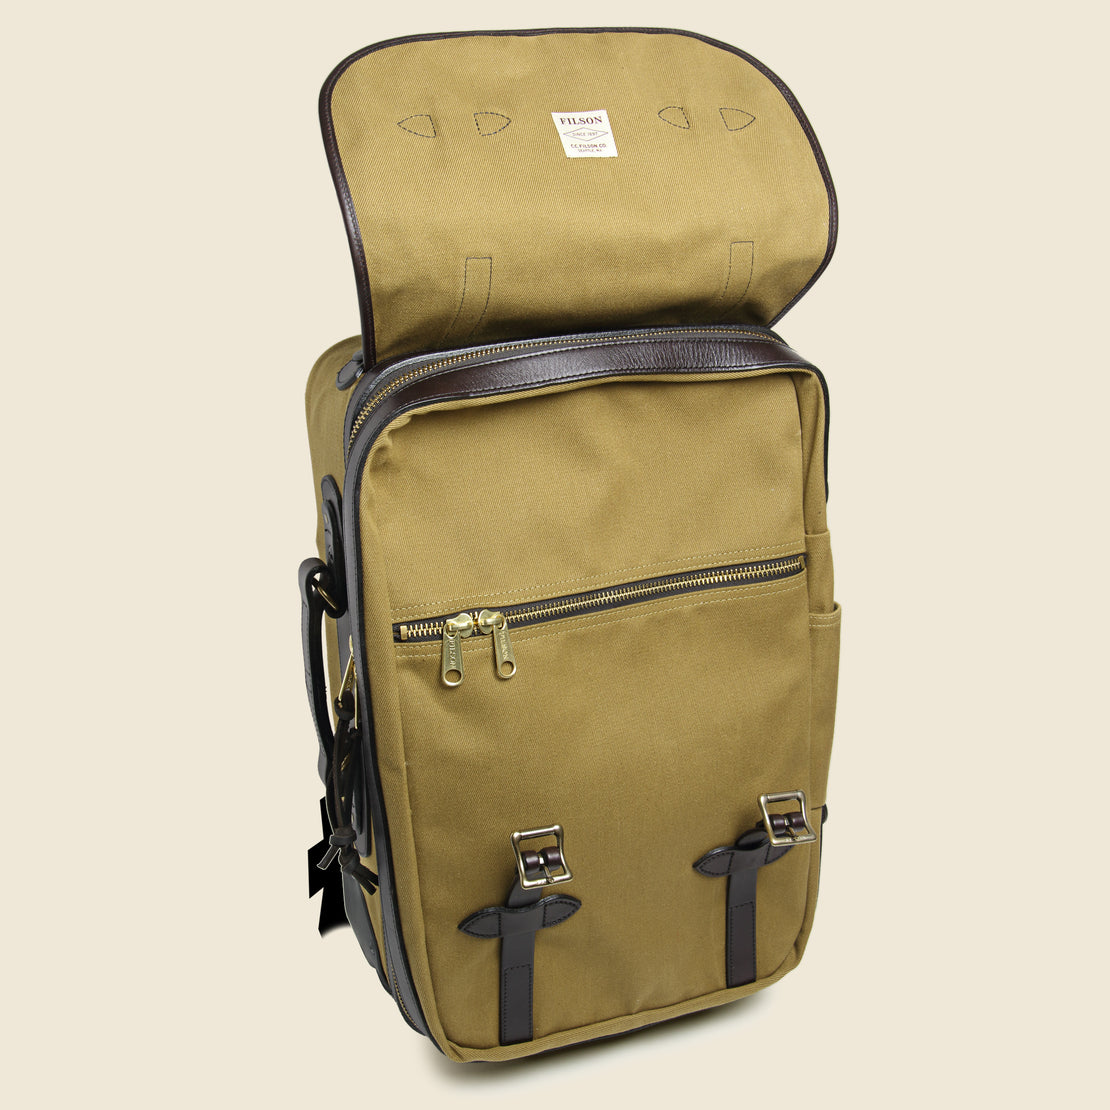 Rolling Carry-On Bag - Tan - Filson - STAG Provisions - Accessories - Bags / Luggage